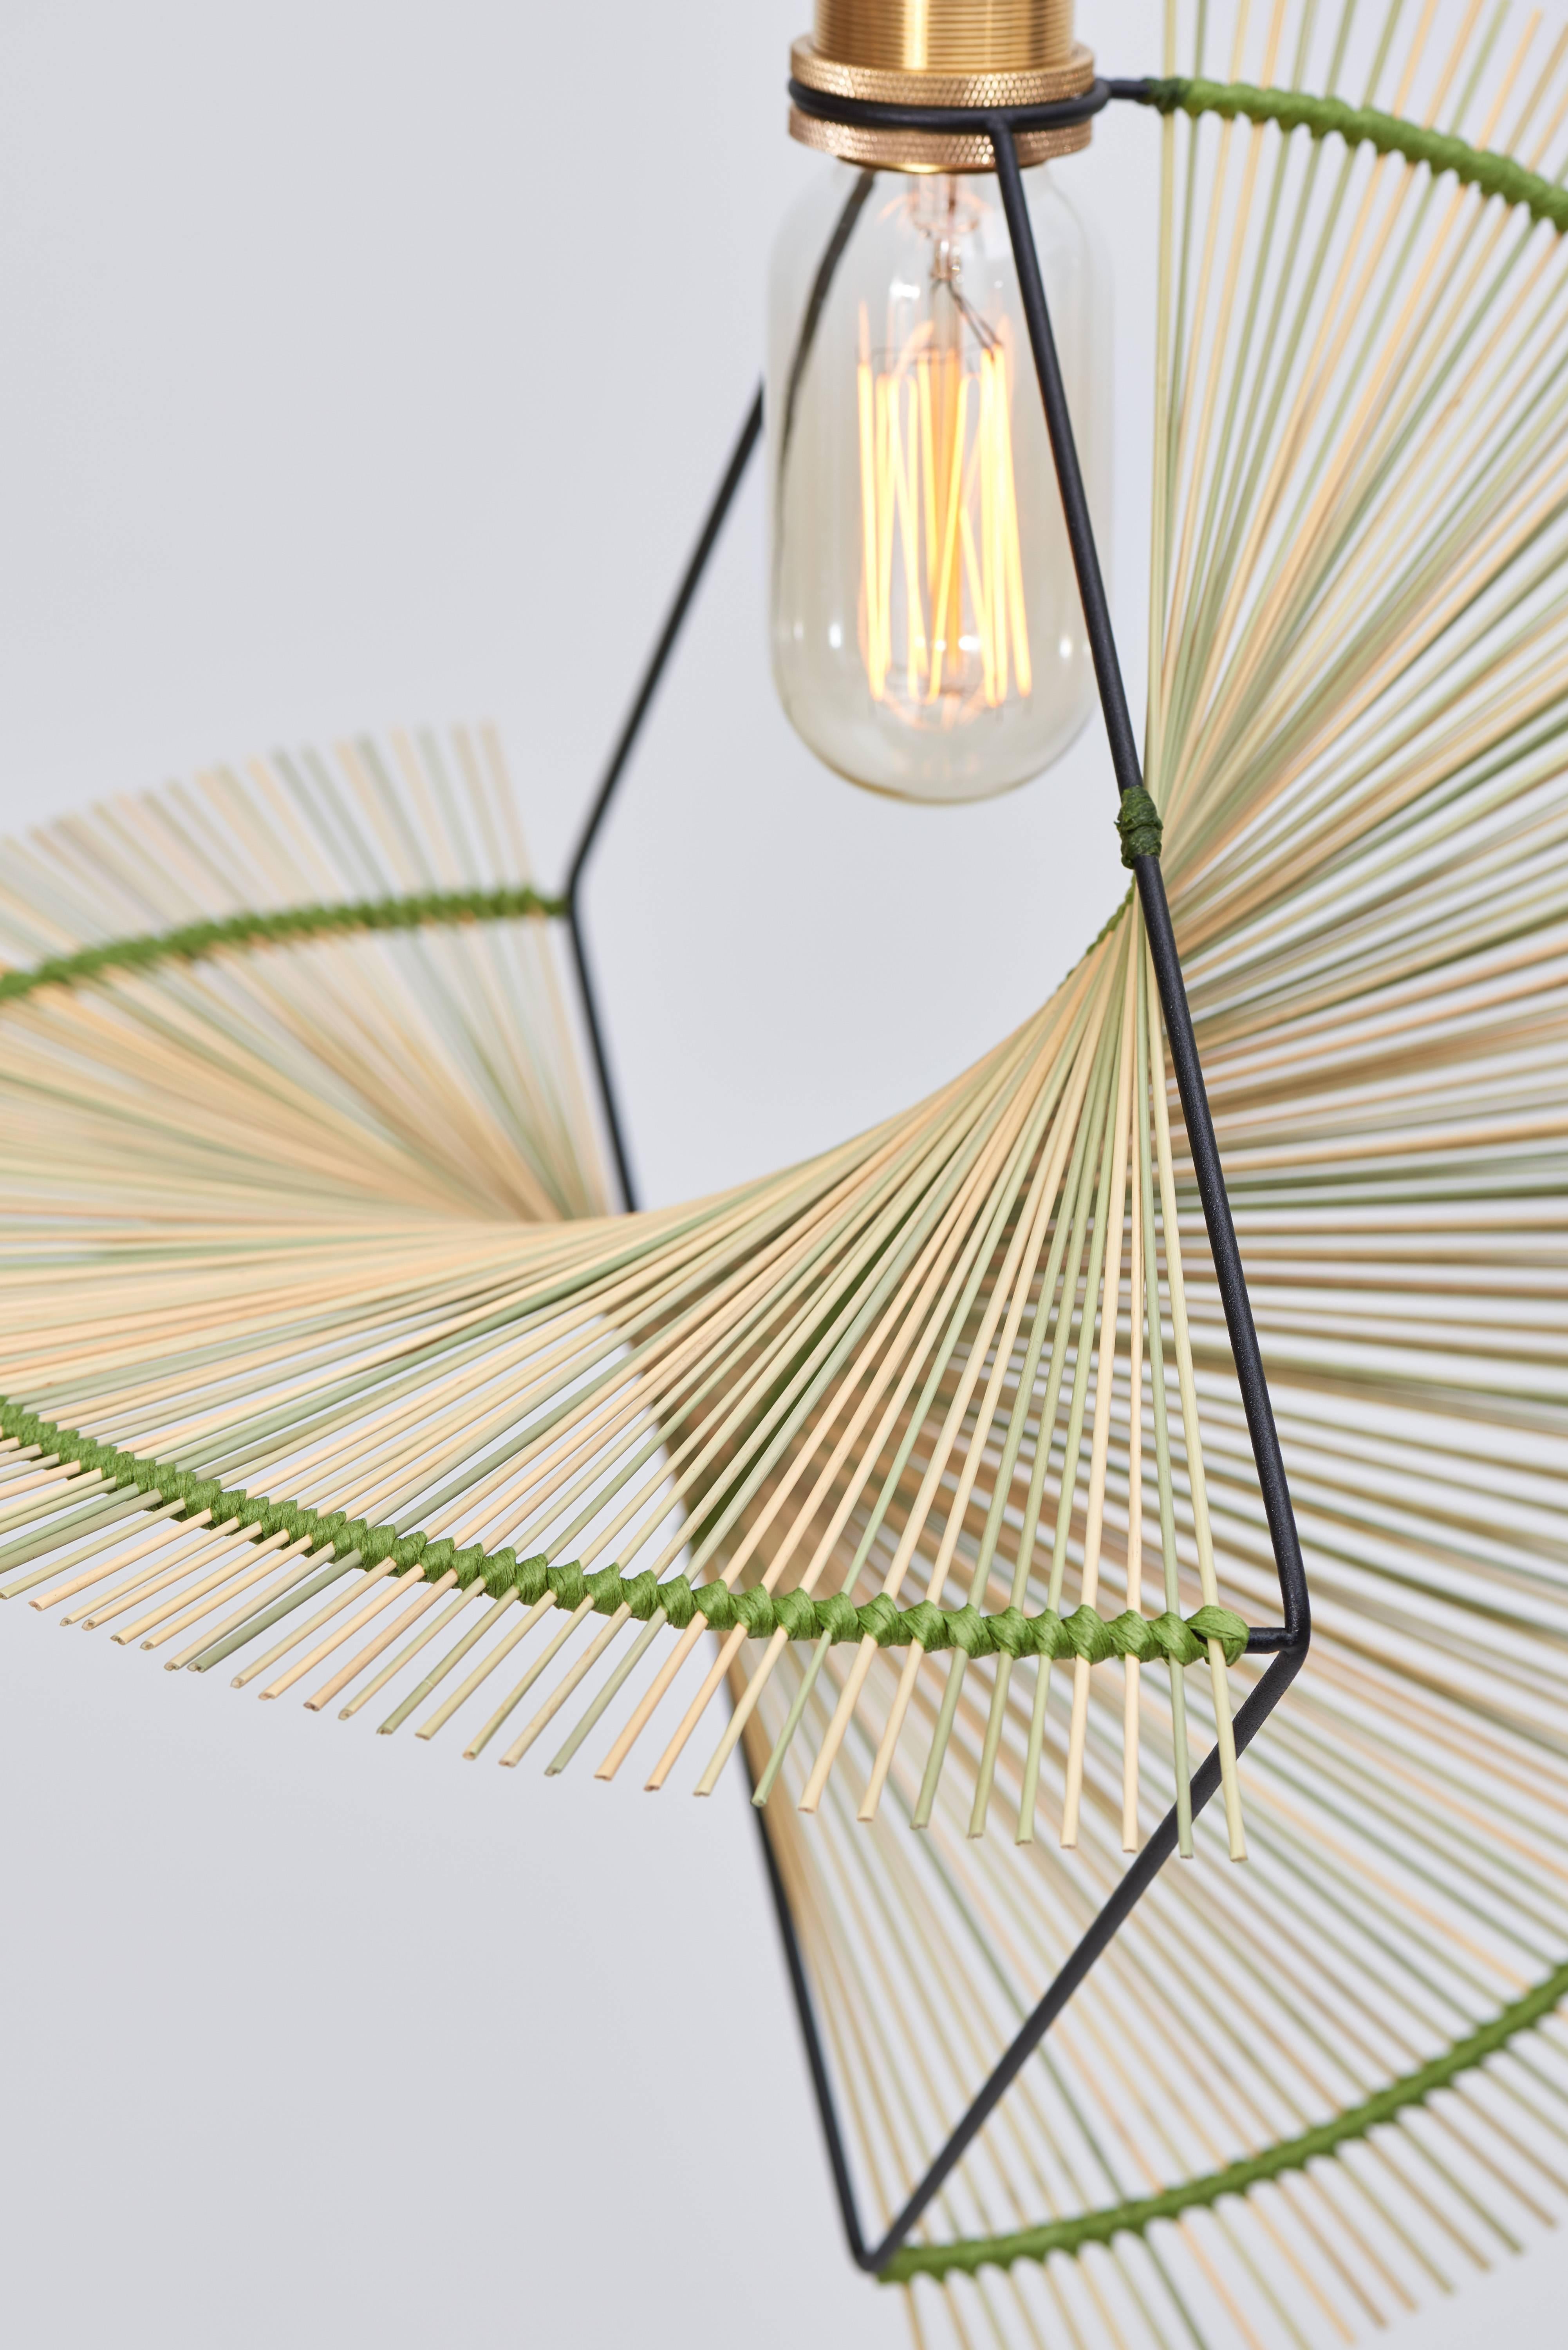 Ryar light
Umbrella sedge,
Powder coated steel
Measures: 60 x 58 x 58 cm
Light bulb included, E27 40W 220V.
Supplied with 250cm black fabric cable.
Wall fixings not included.

Ryar means ocean in the Pangcah language, this is a pendant light